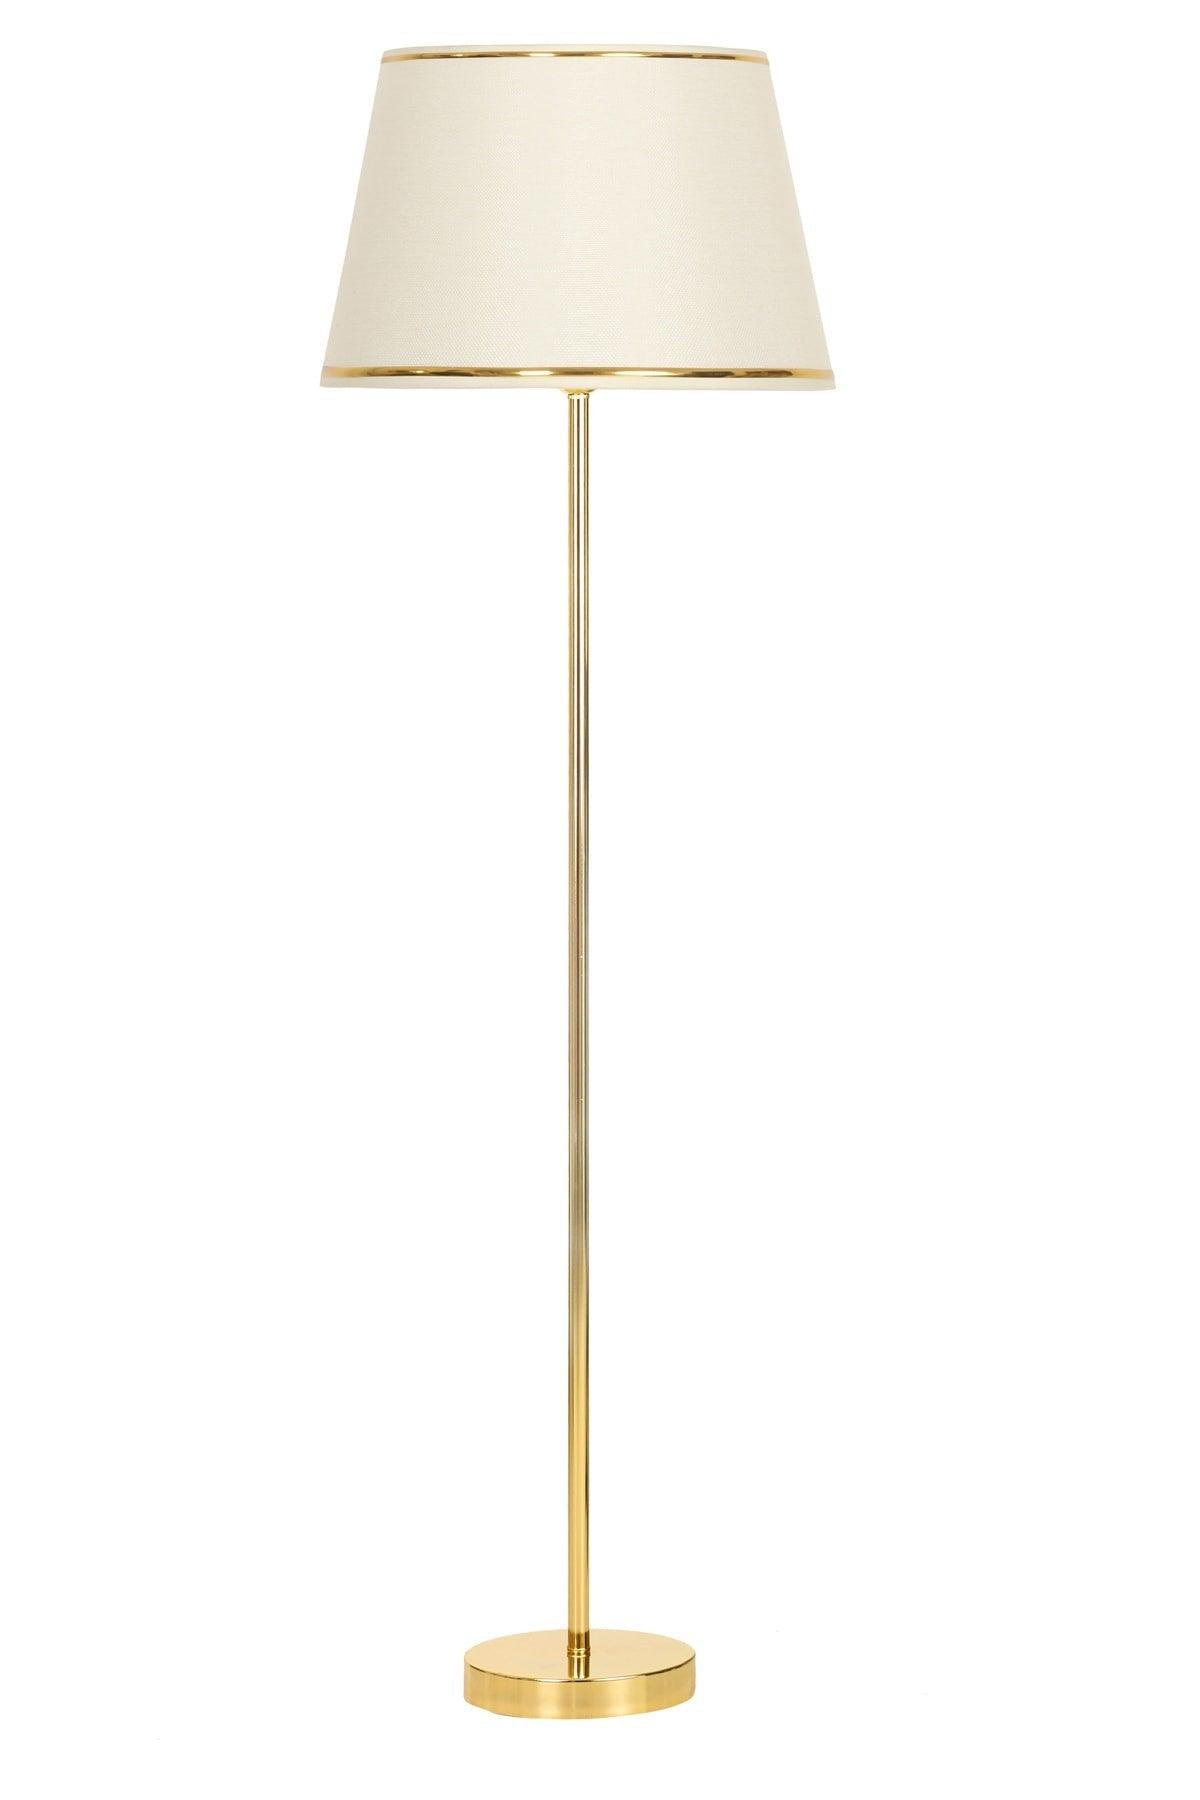 Conic Gold Plated Stainless Metal Single Leg Floor Lamp Gold Striped Cream - Swordslife